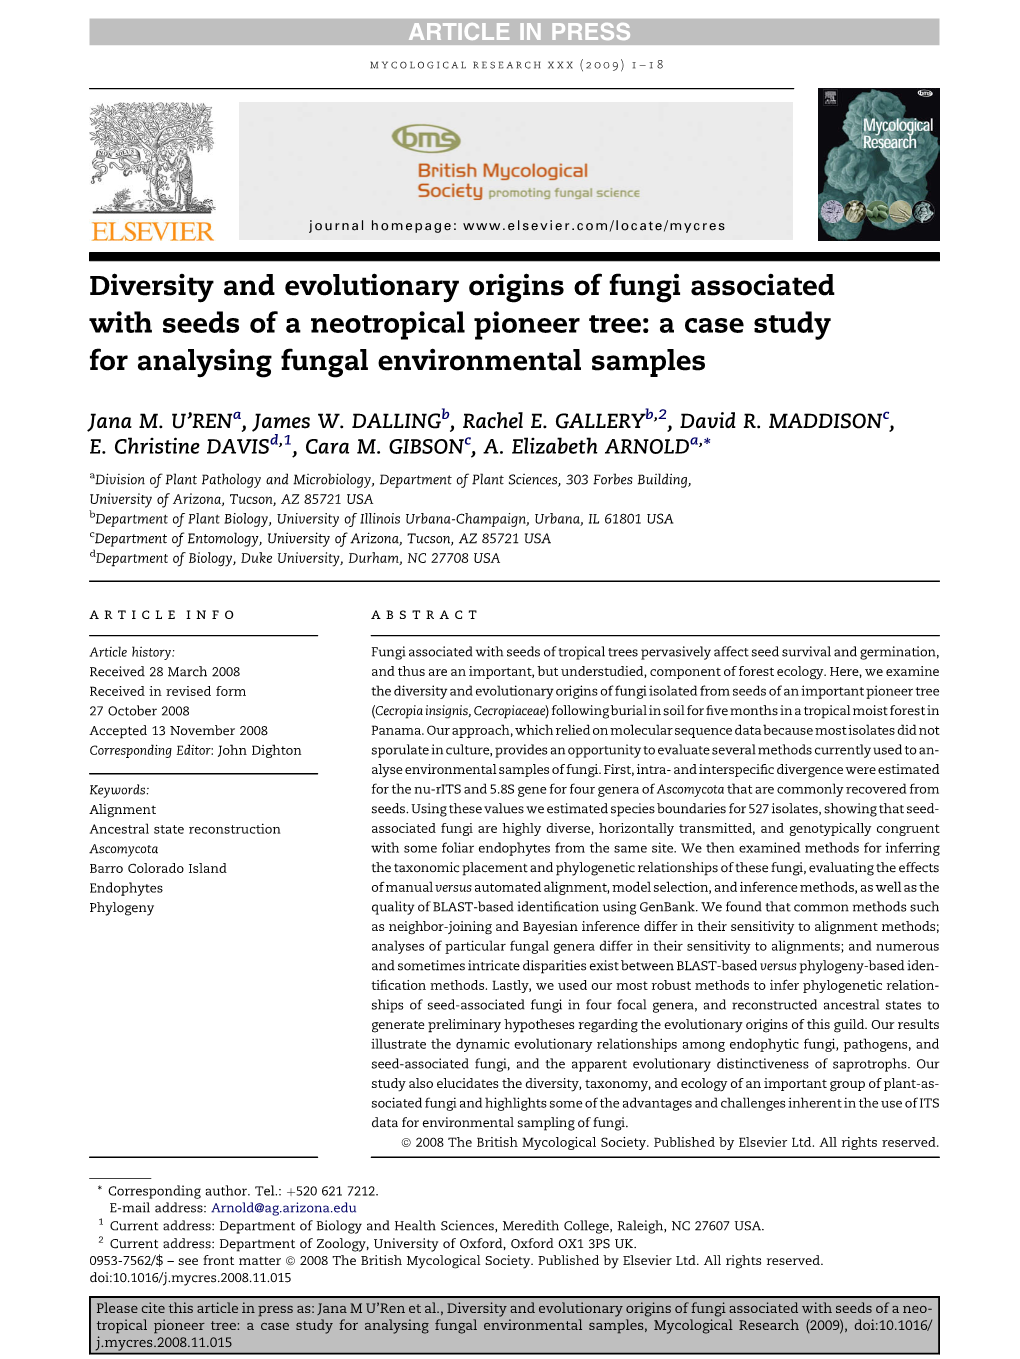 Diversity and Evolutionary Origins of Fungi Associated with Seeds of a Neotropical Pioneer Tree: a Case Study for Analysing Fungal Environmental Samples